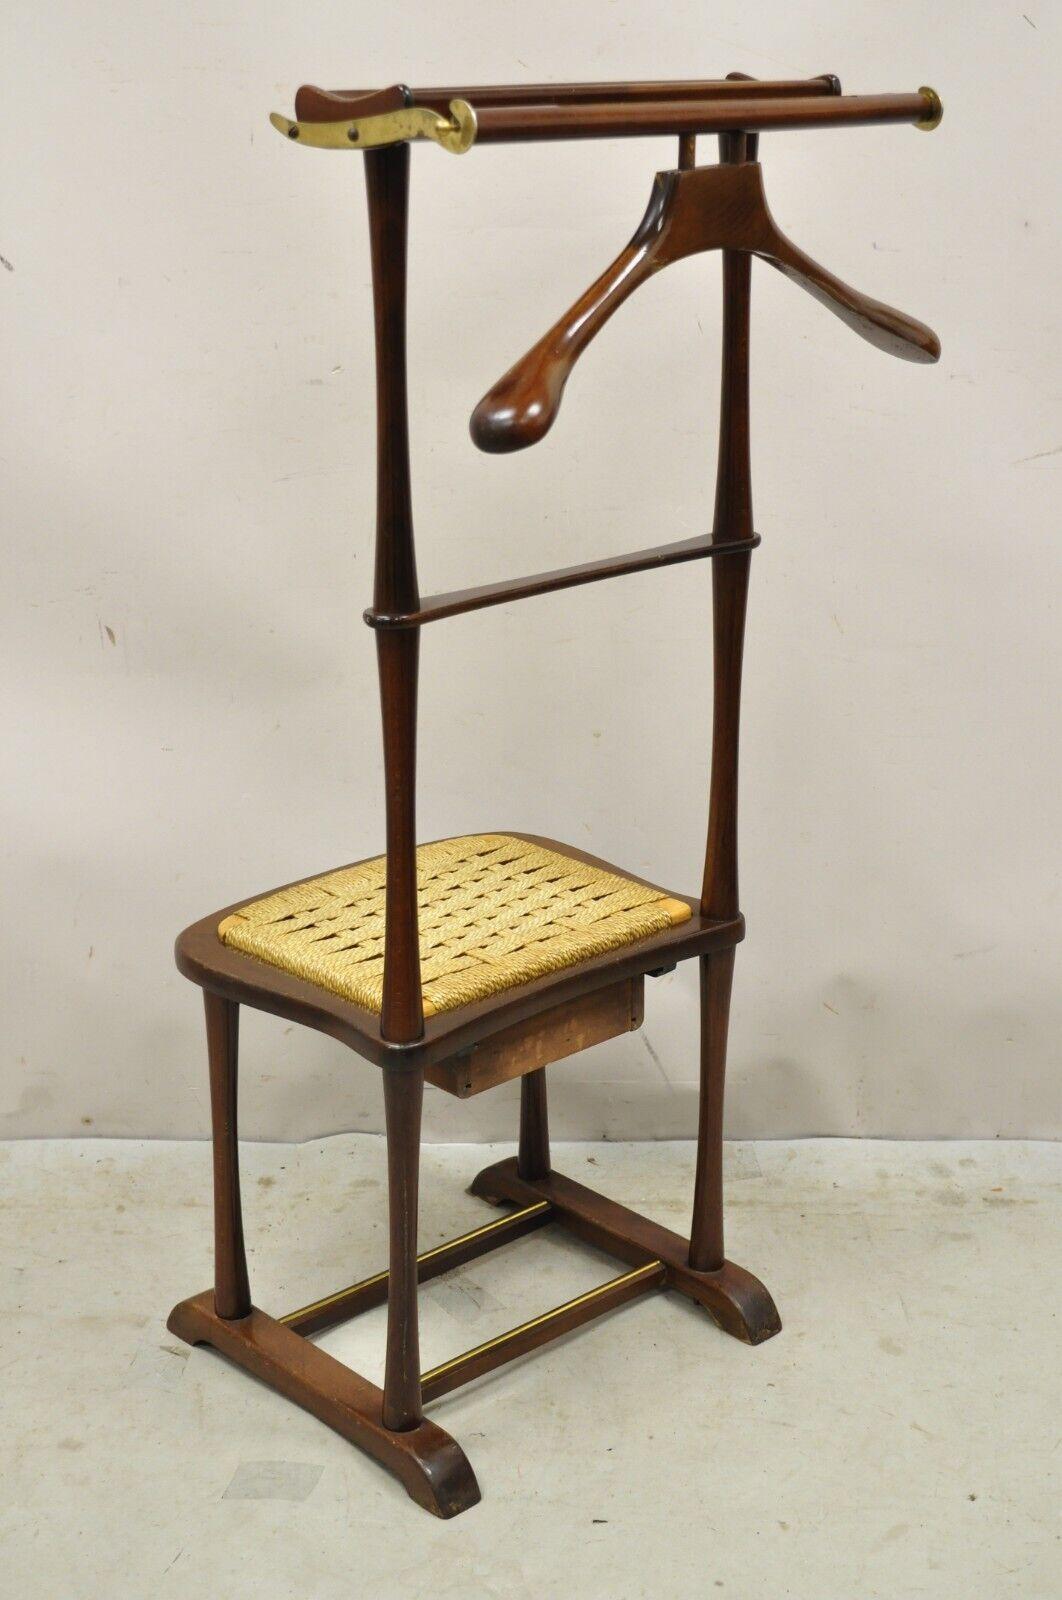 Vintage SPQR Mid Century Italian Modern Birch and Brass Clothing Valet Chair with Drawer. Caractéristiques de l'article. Circa Mid 20th Century.
Dimensions : 42,5